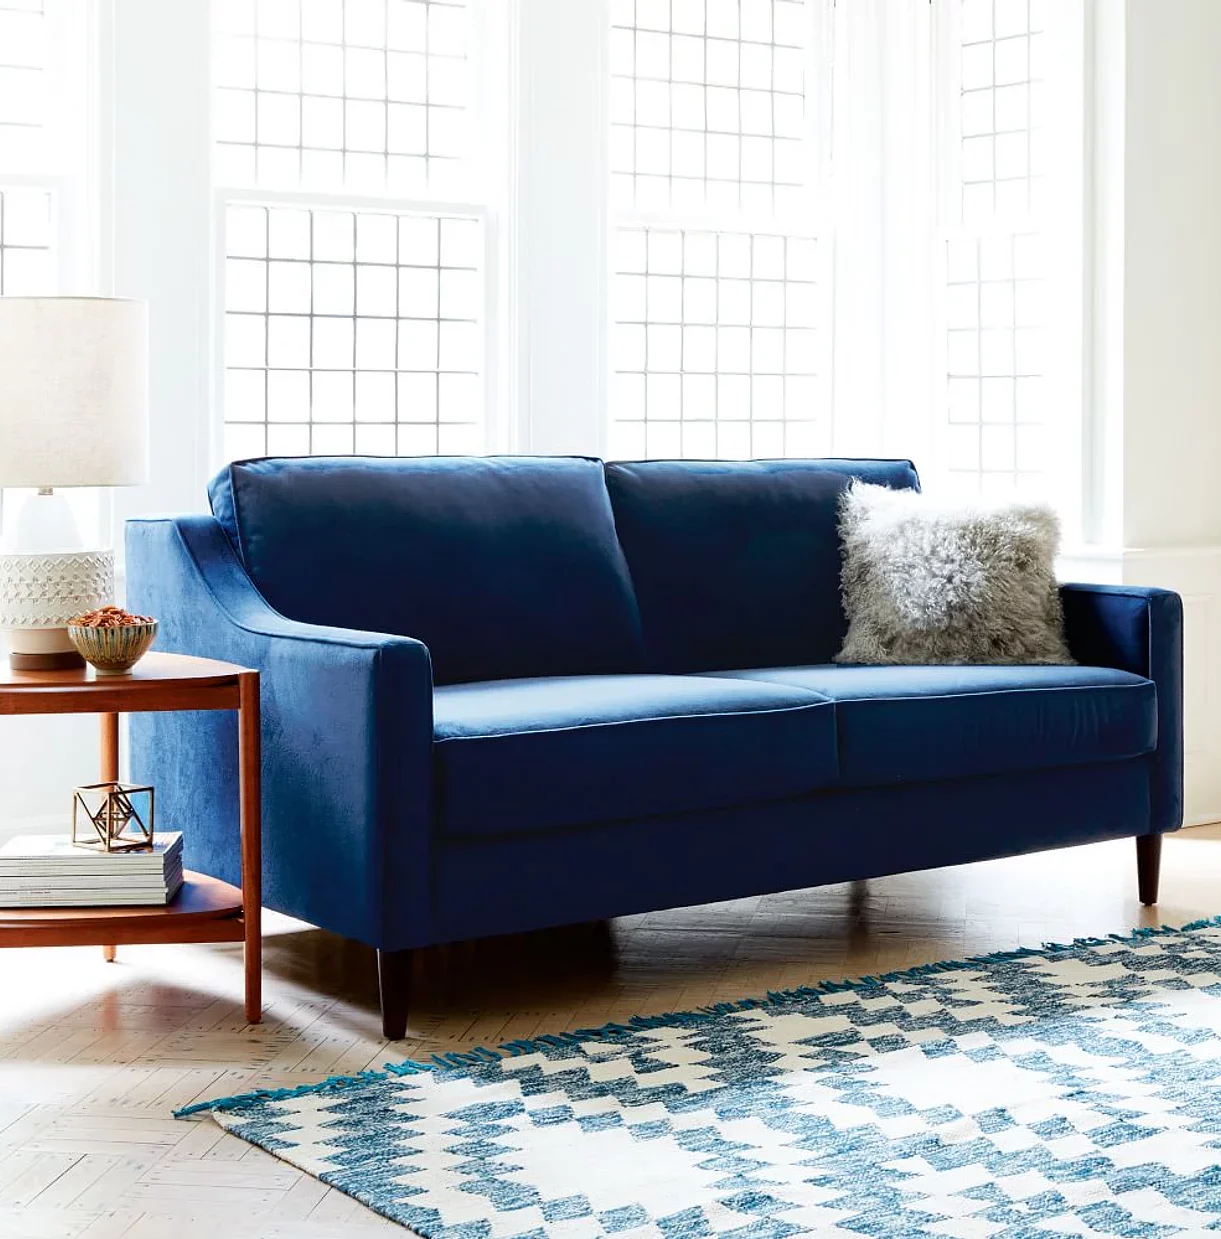 ink blue coloured latest sofa set design, placed in a living room, sky blue coloured carpet placed under the furniture, wooden side table placed near the couch